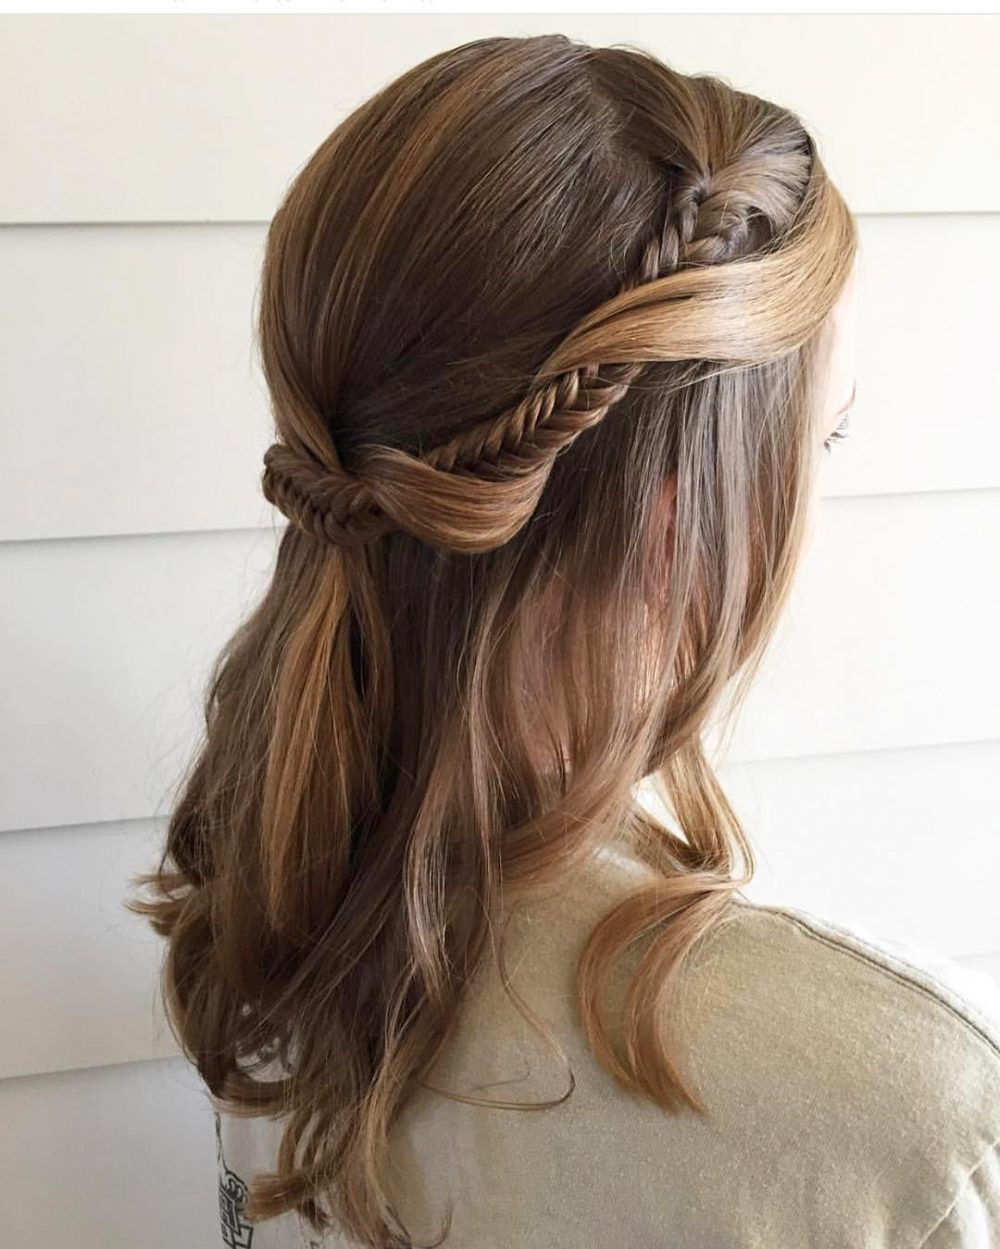 Easy Prom Hairstyles For Medium Hair
 21 Super Easy Updos Anyone Can Do Trending in 2019